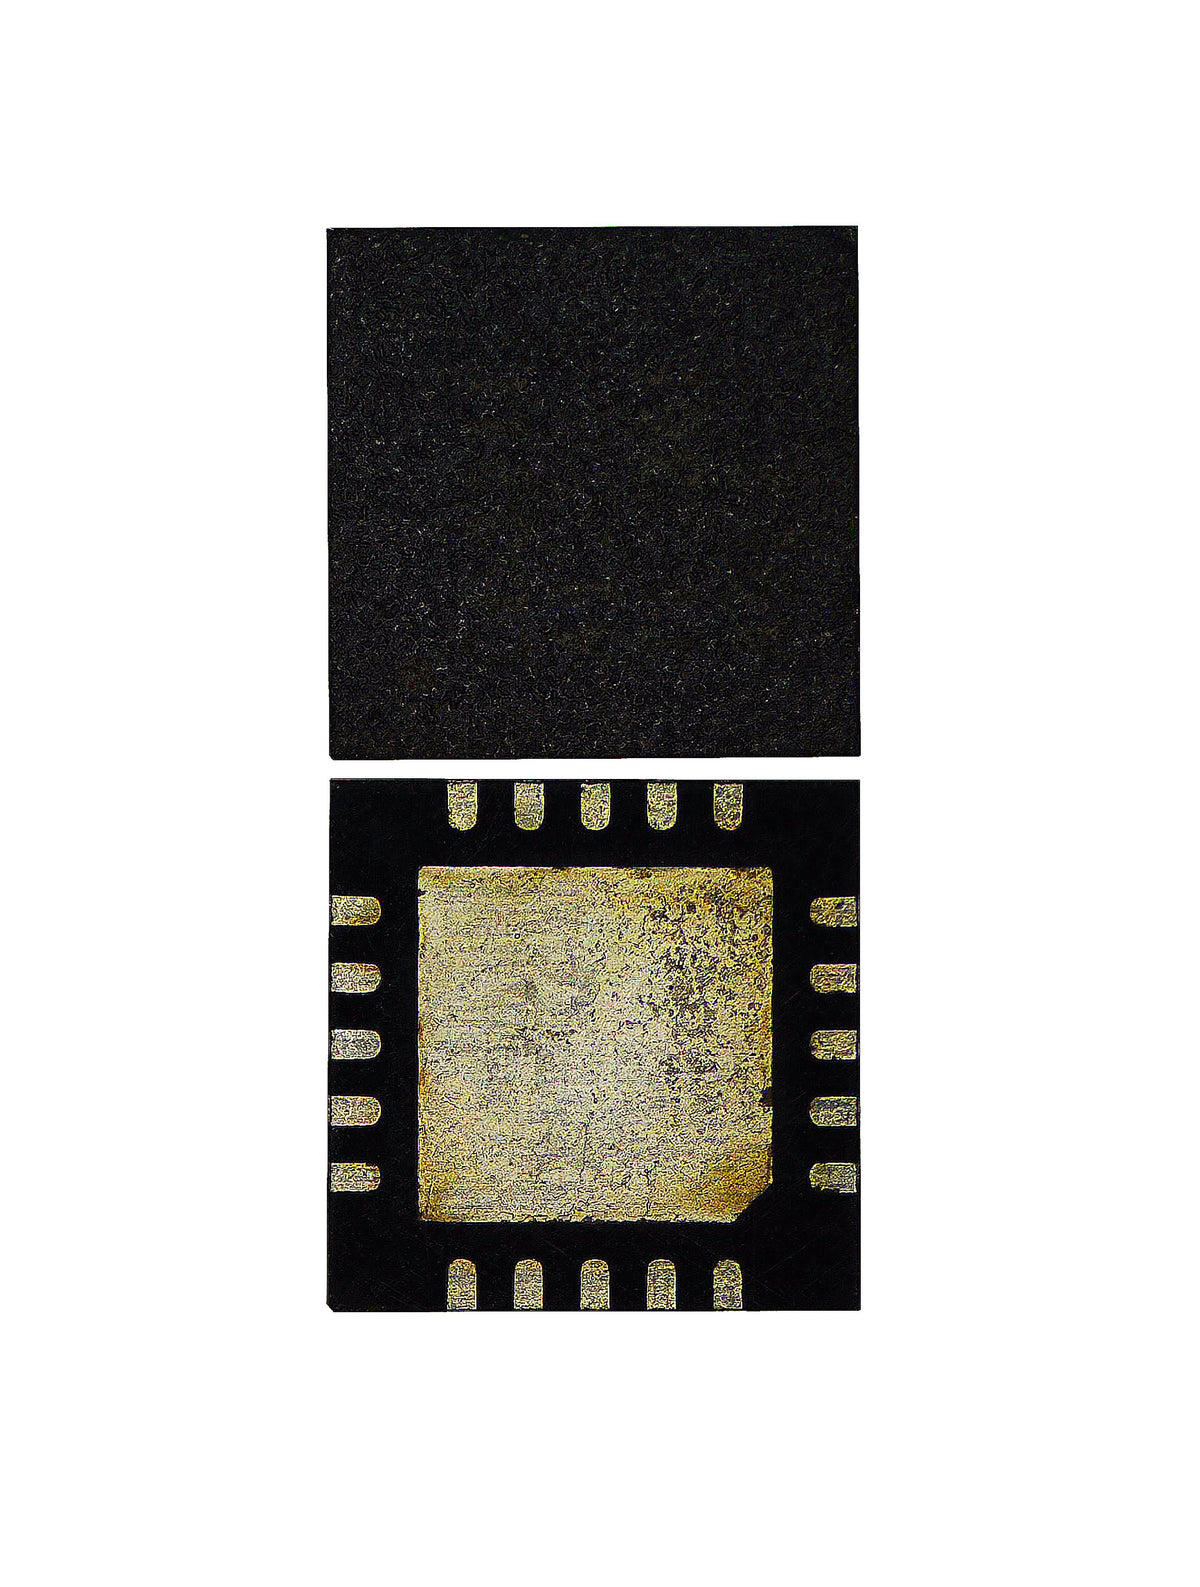 POWER IC COMPATIBLE WITH MACBOOKS (TI:CD3211A1RGPR / CD3211A1 / CD3211: QFN-20 PIN)